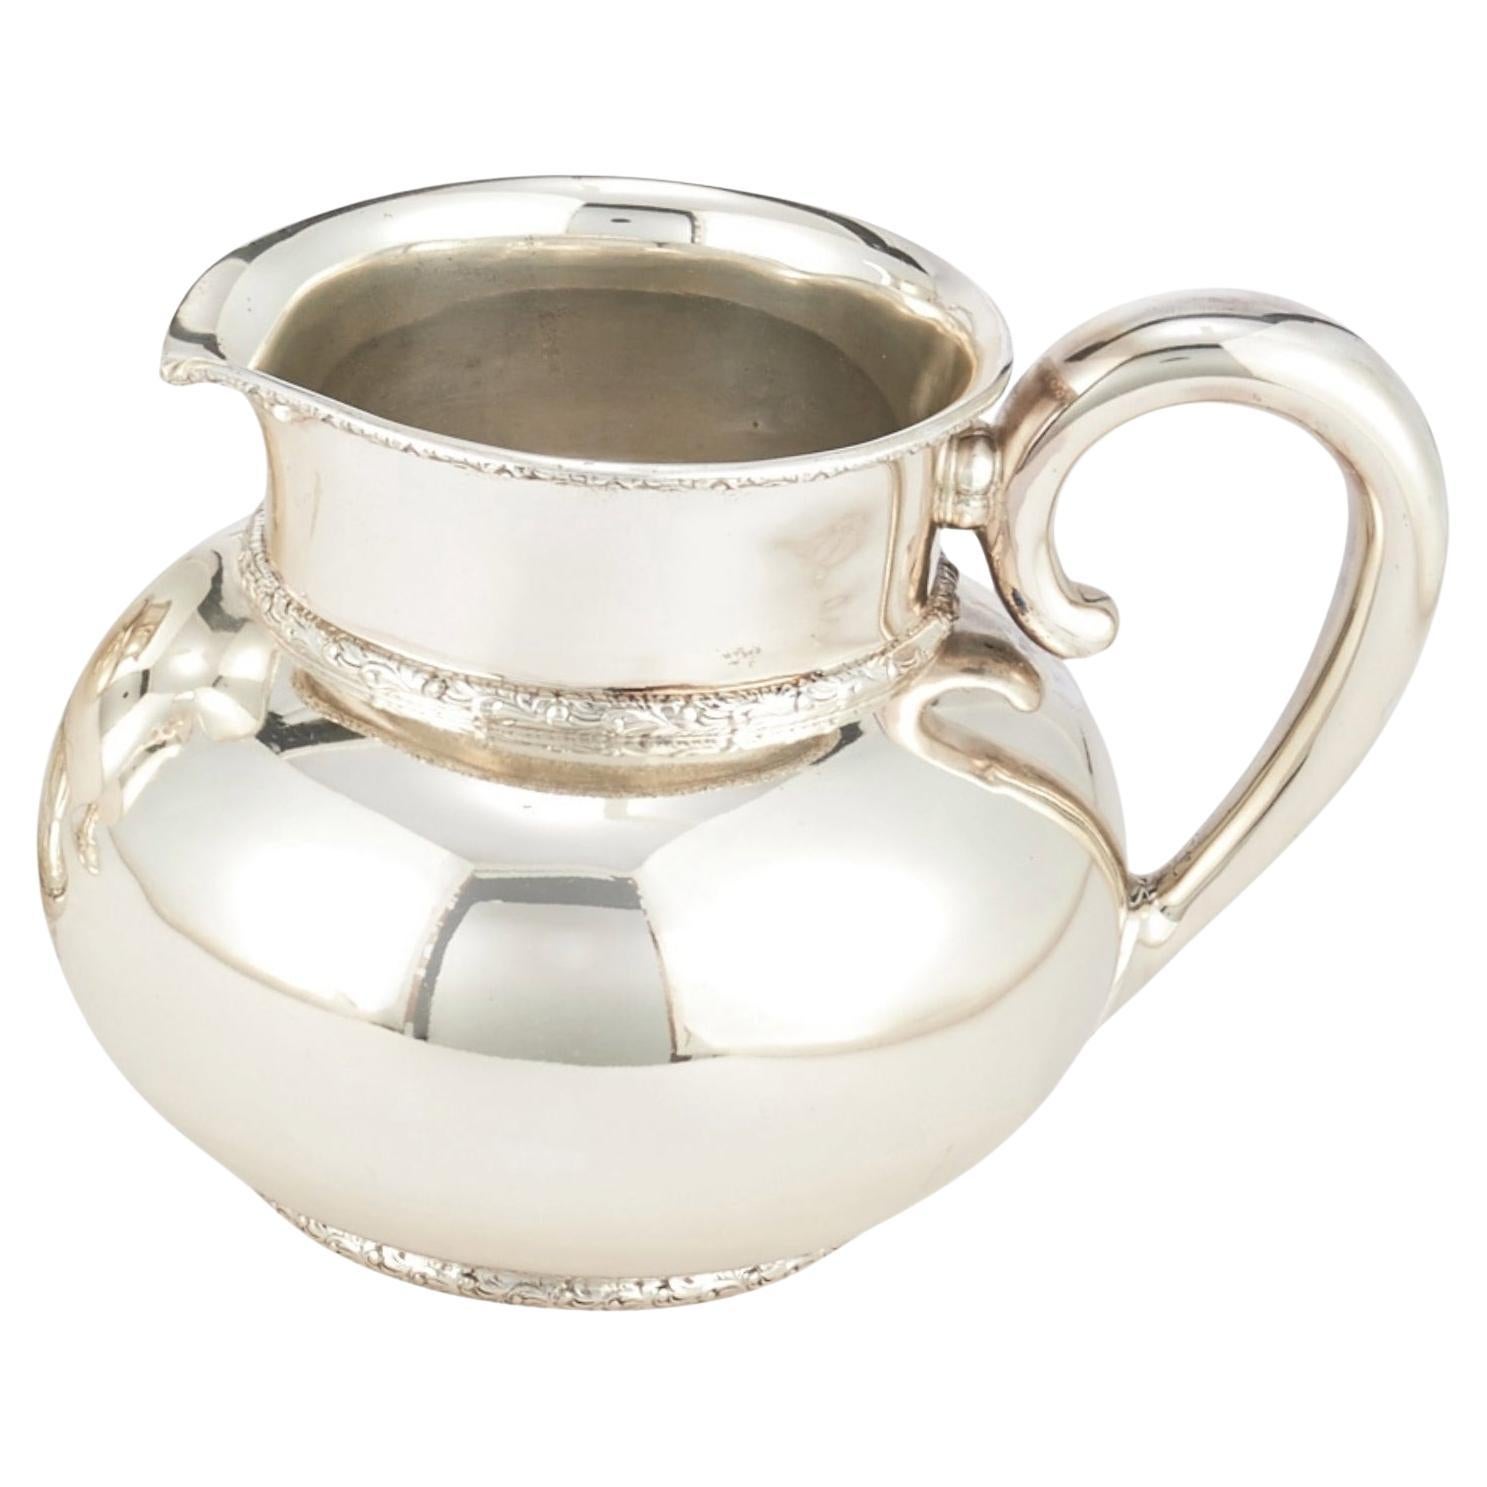 Early 20th Century Sterling Silver Tableware Serveware Pitcher